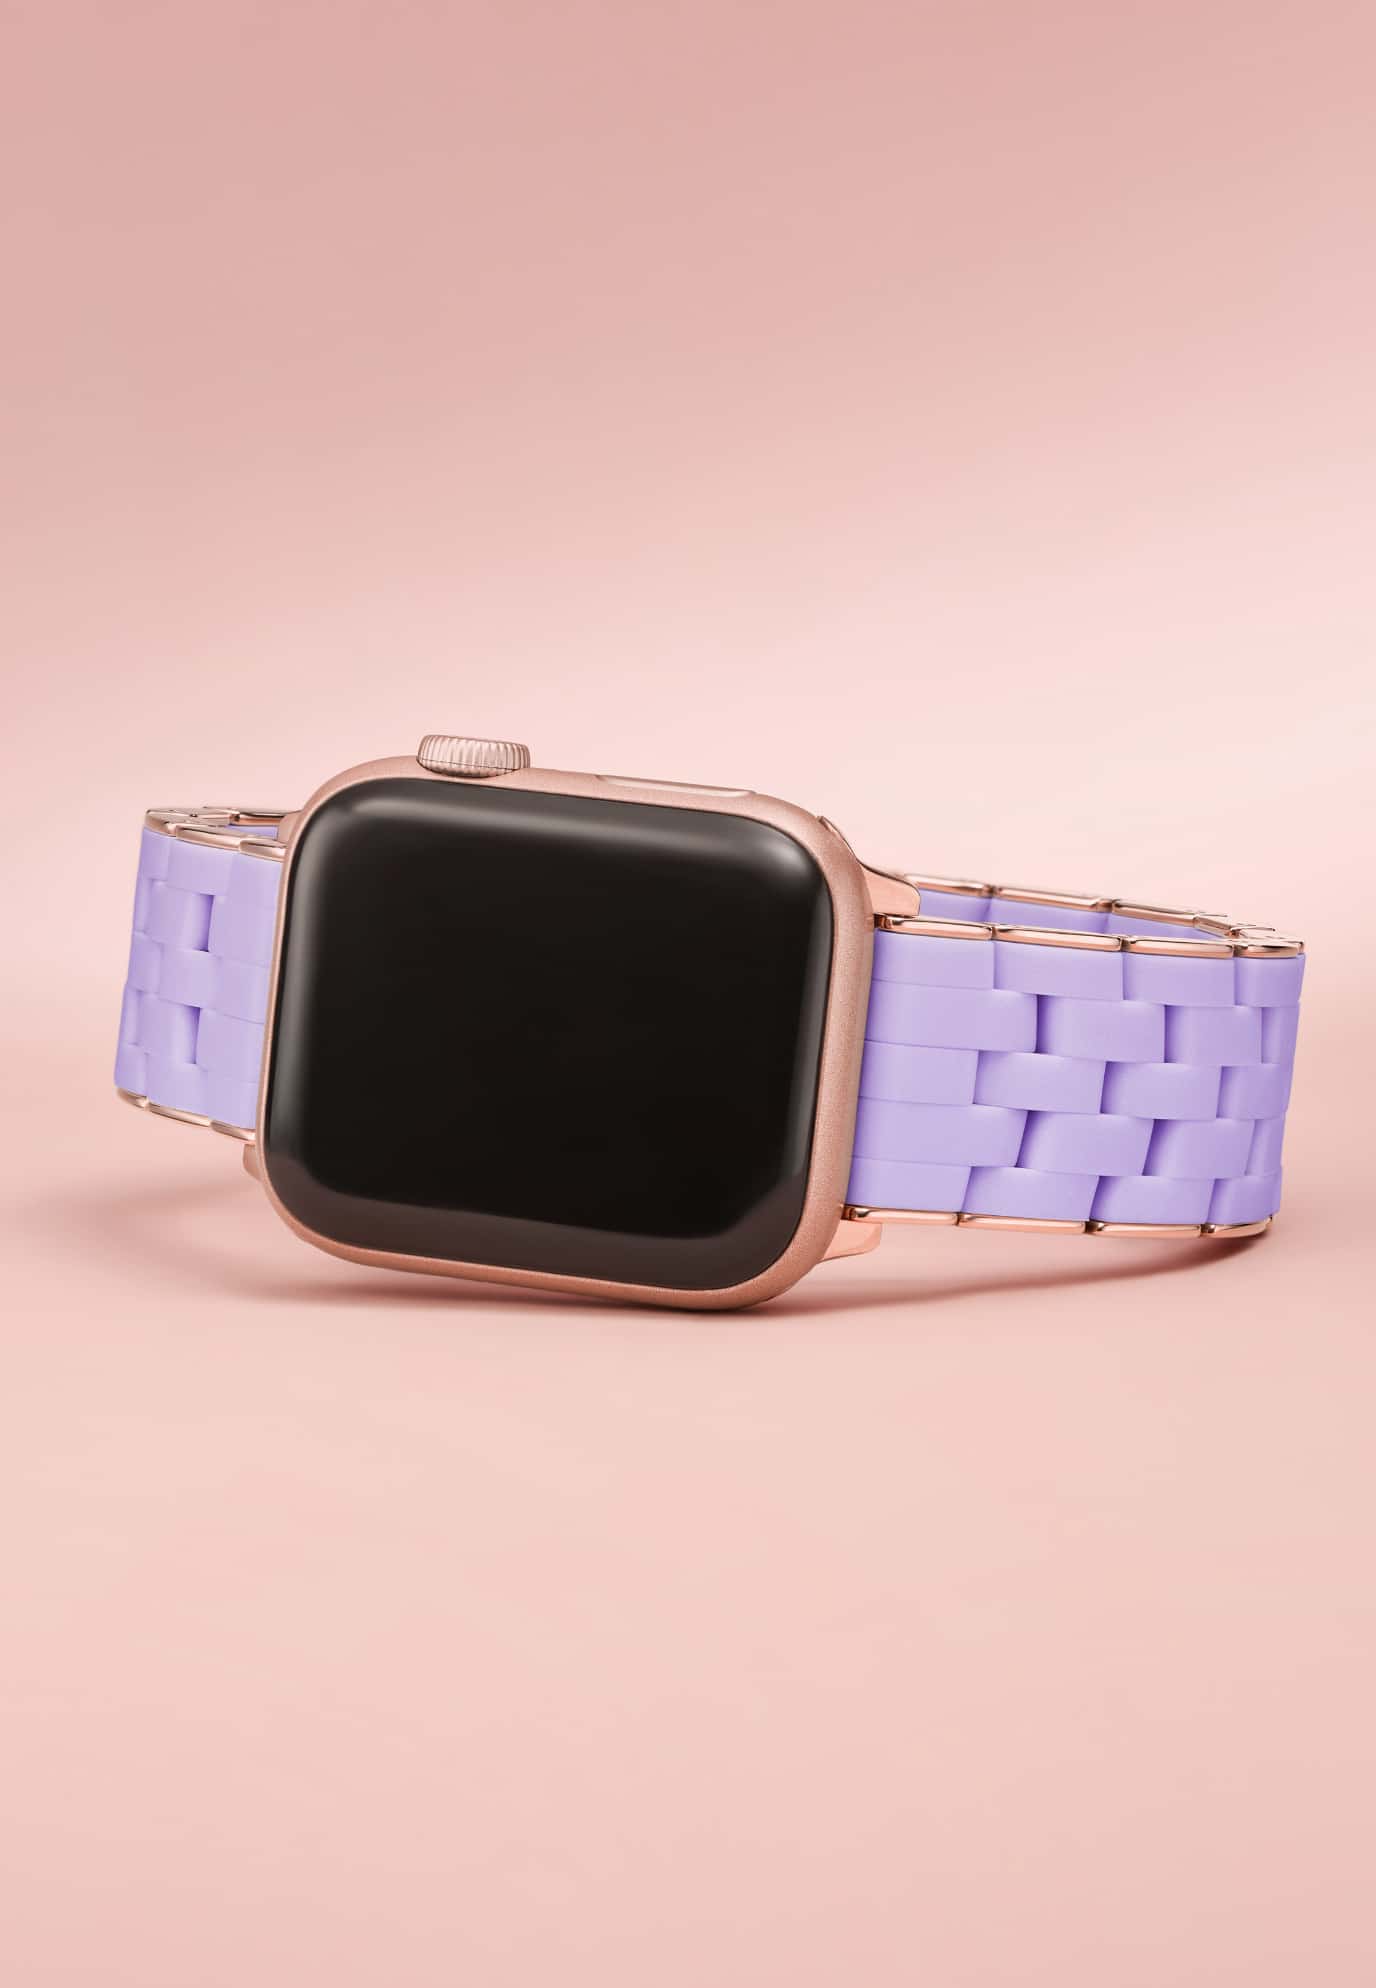 lavender silicon-wrapped bracelet for Apple Watch featuring rose gold plating